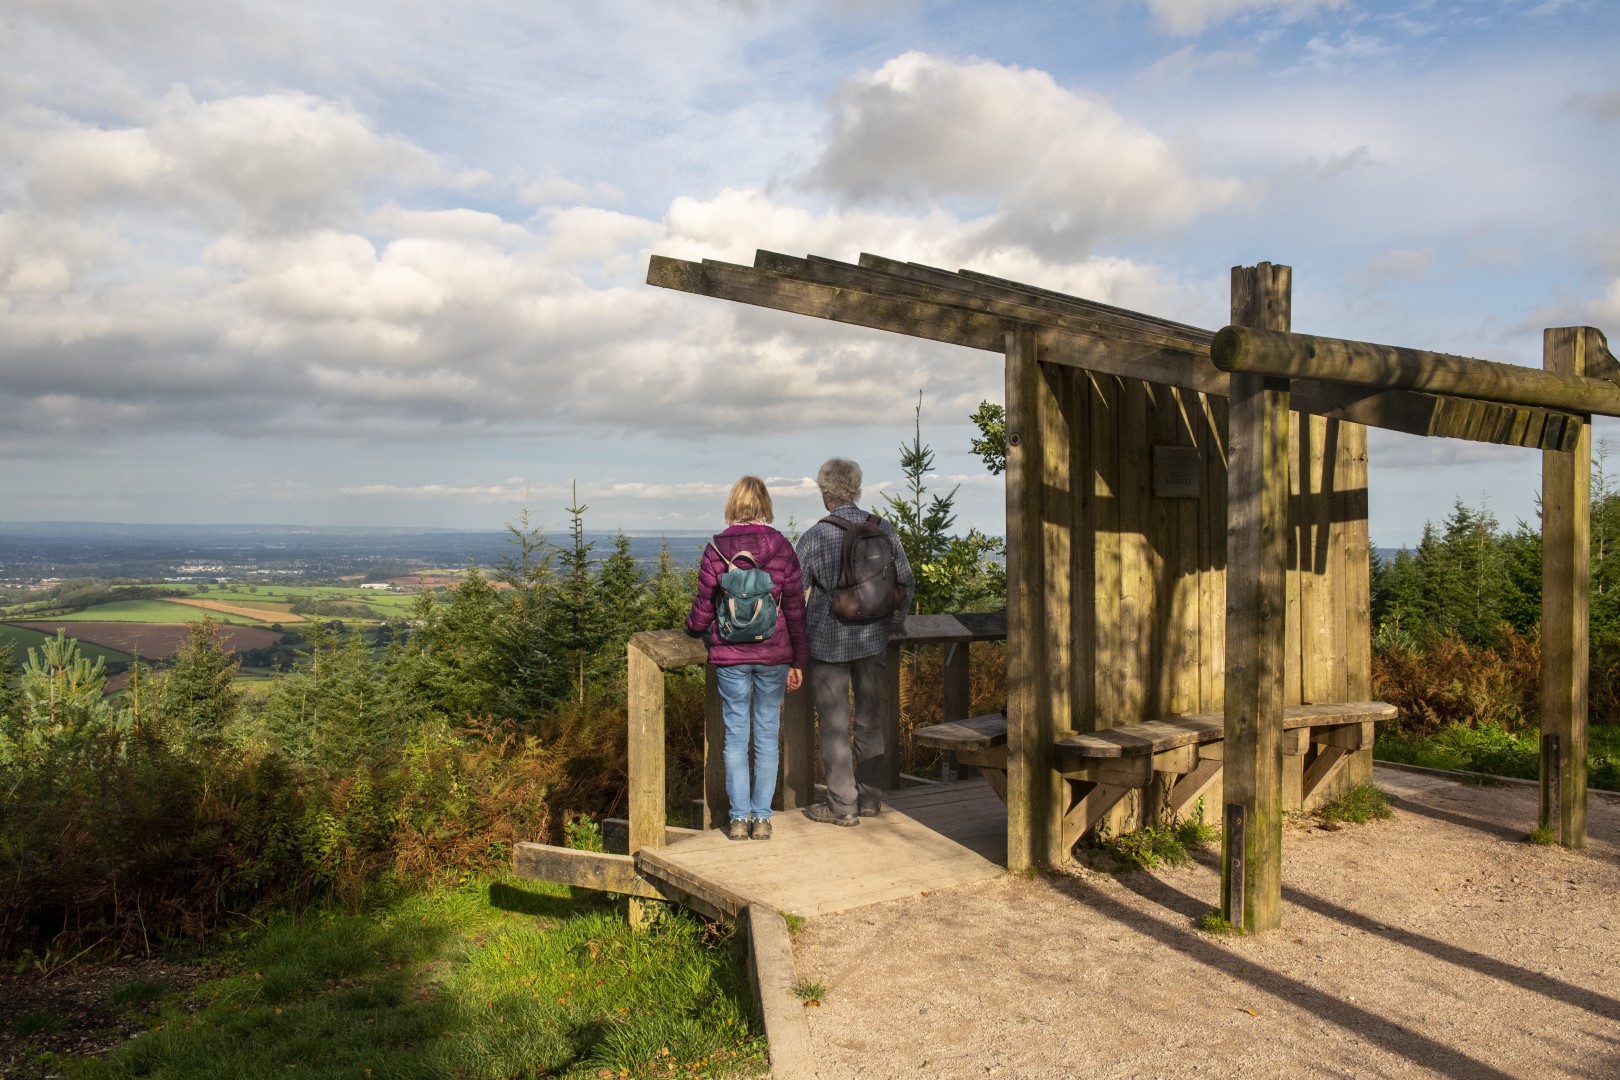 A couple stand under a wooden shelter looking at a far-reaching view